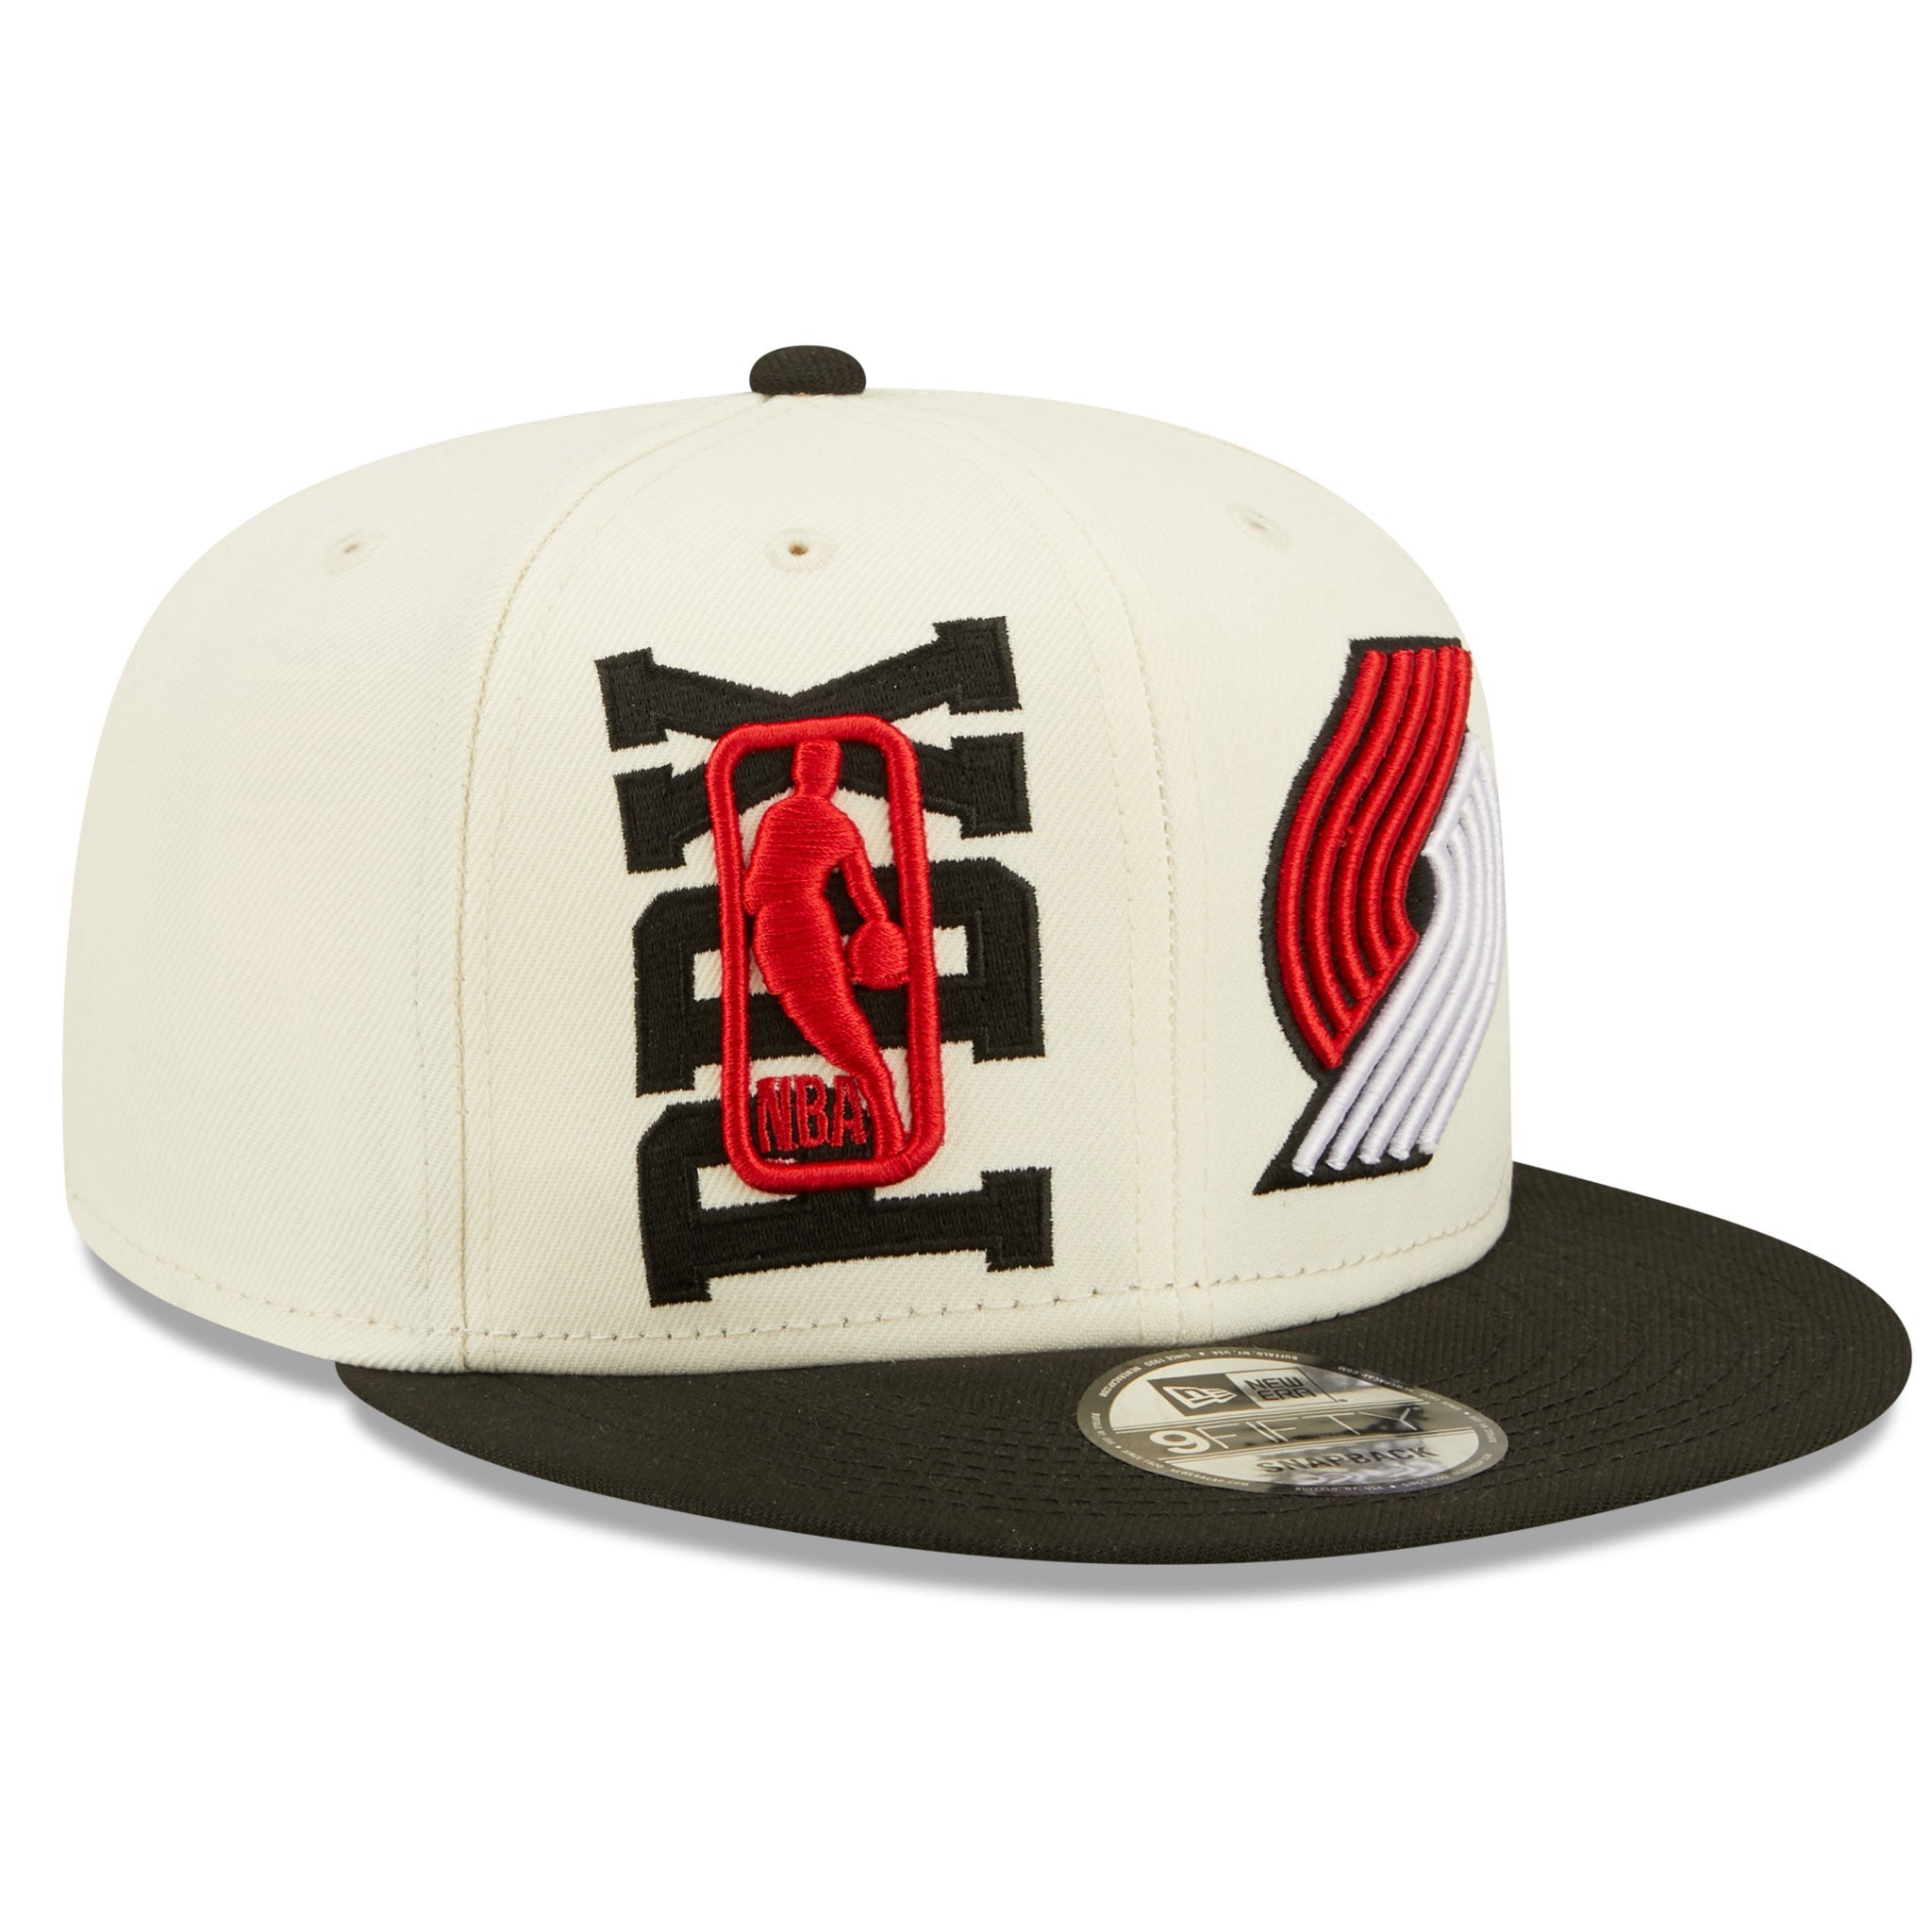 Official Portland Trail Blazers Hats, Snapbacks, Fitted Hats, Beanies